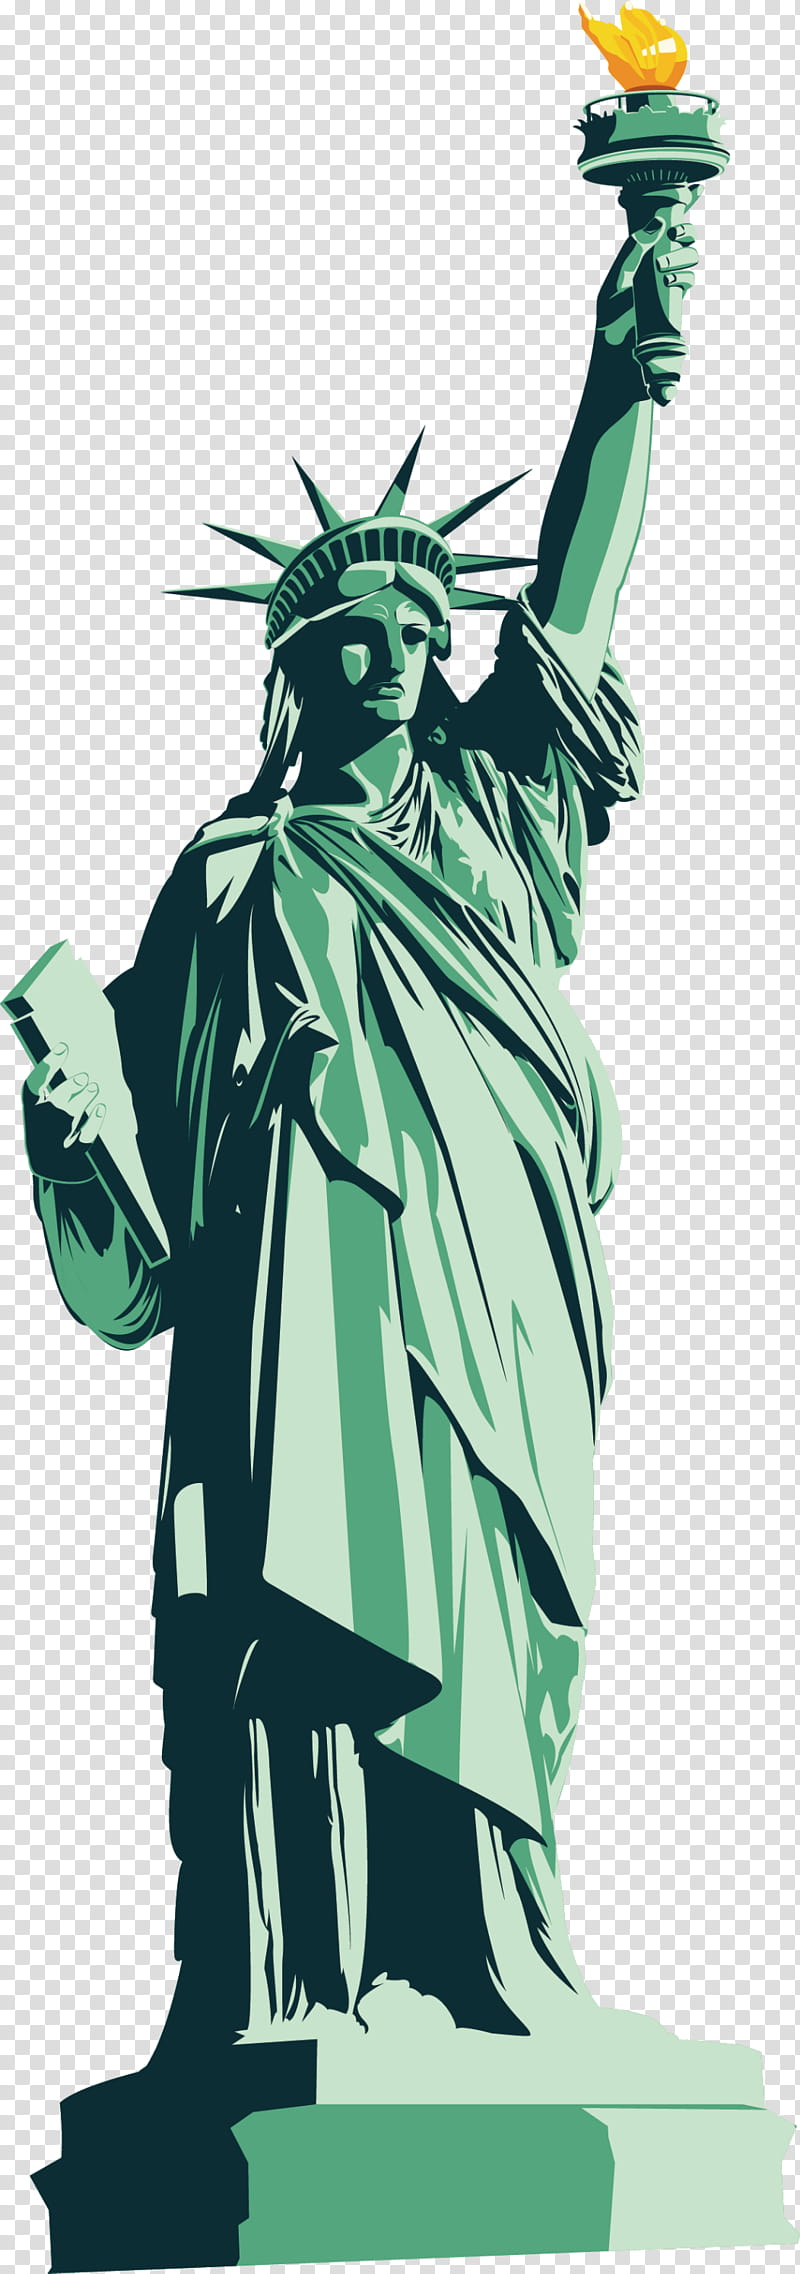 Statue Of Liberty, Statue Of Liberty National Monument, Sculpture, Logo, Cartoon, Drawing, Tourist Attraction transparent background PNG clipart